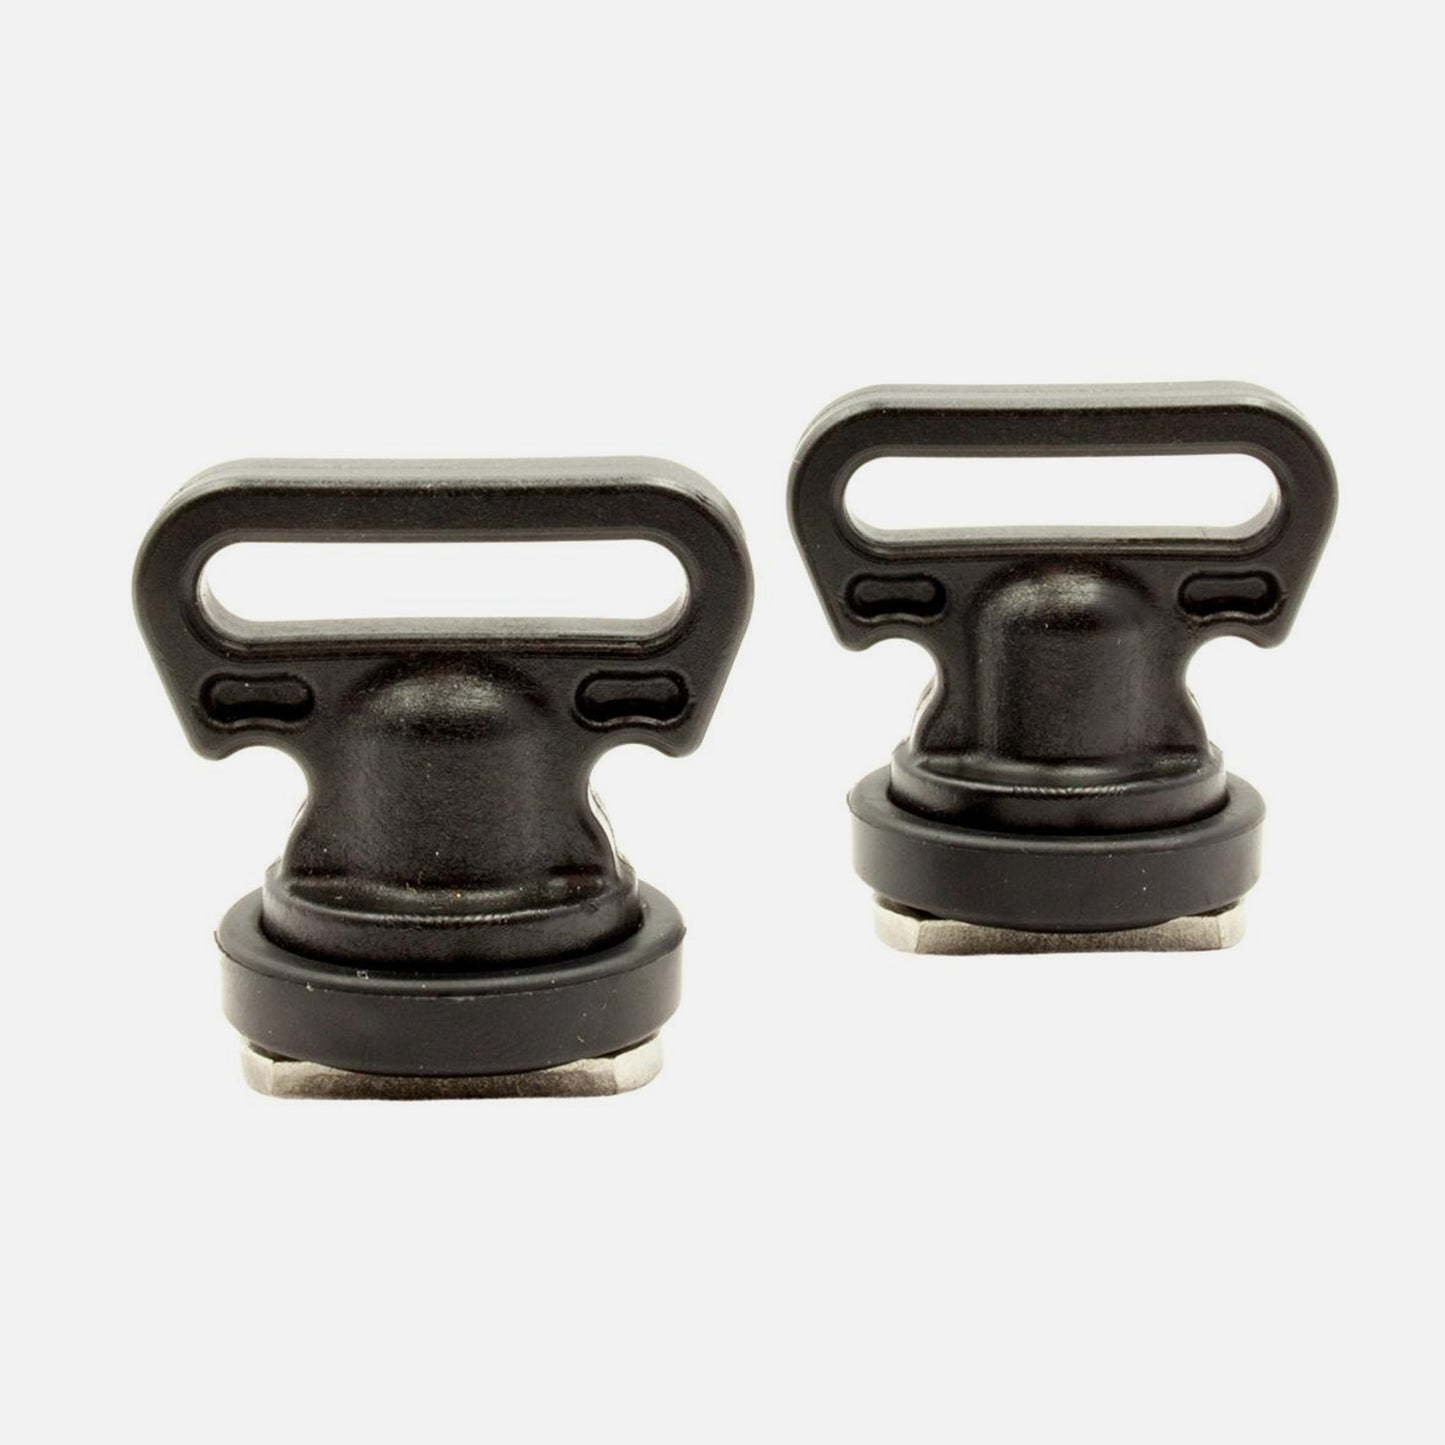 YakAttack Vertical Tie Downs, Track Mount, 2 pack